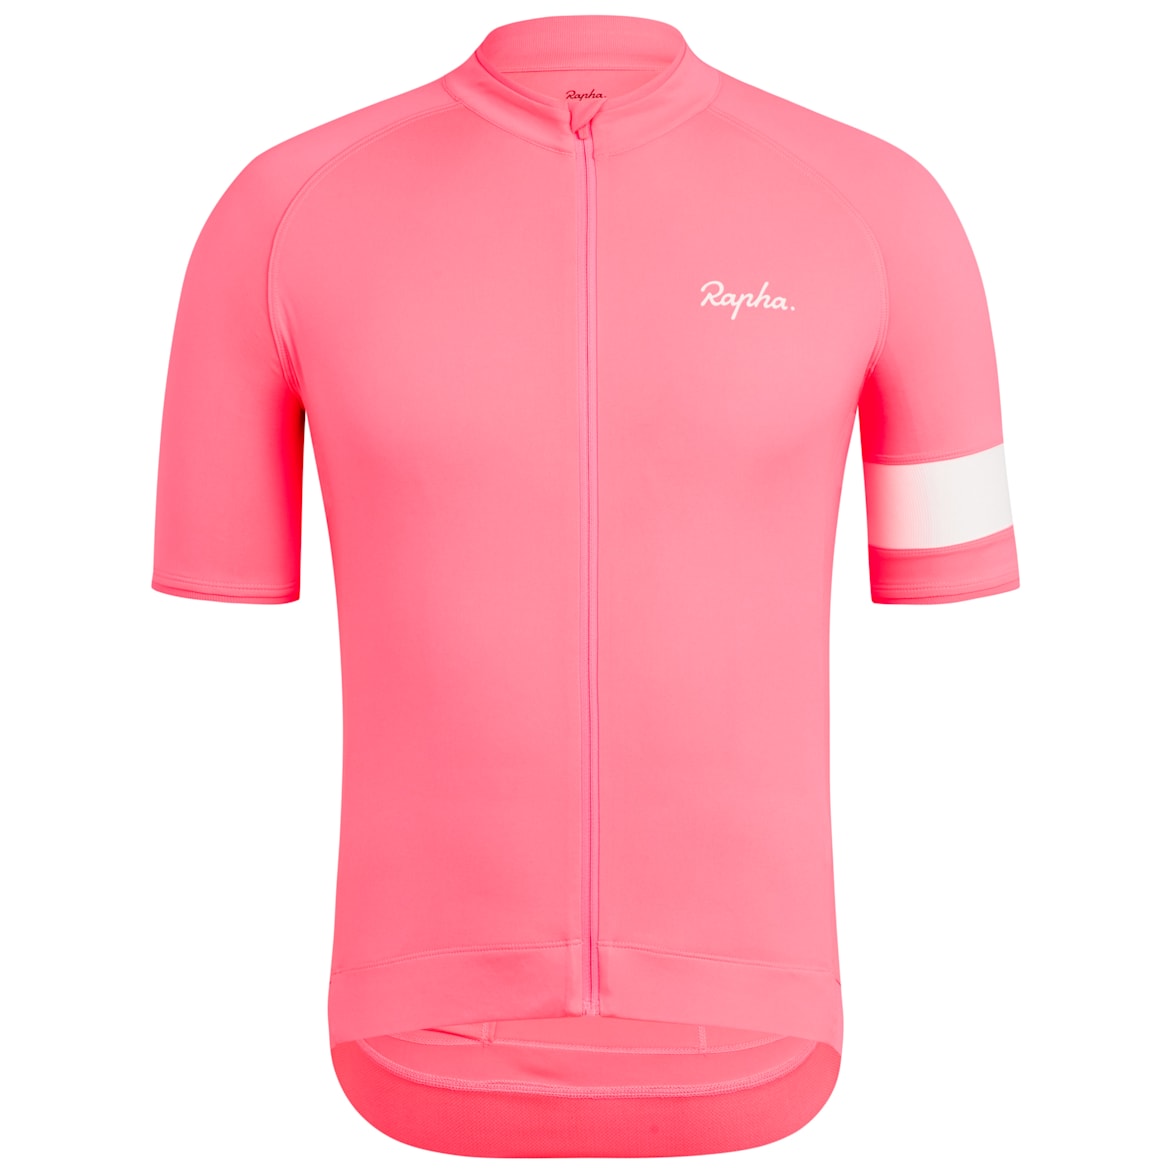 Rapha Jerseys Sale | Cycling Clothing | Up to 40% Off Selected